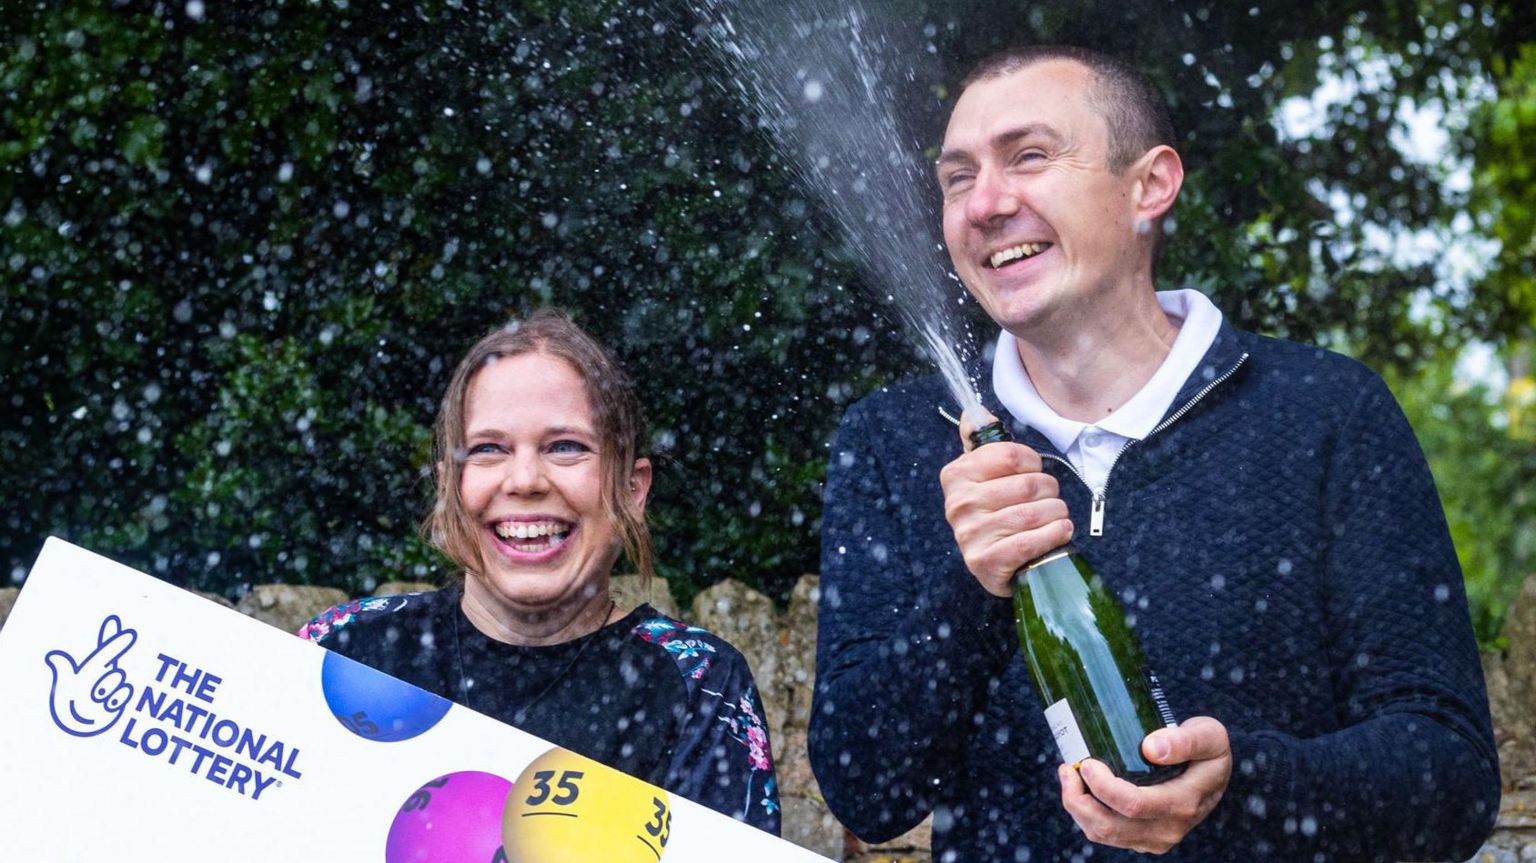 Katherine and Graeme White spraying fizzy wine from a bottle with a National Lottery sign